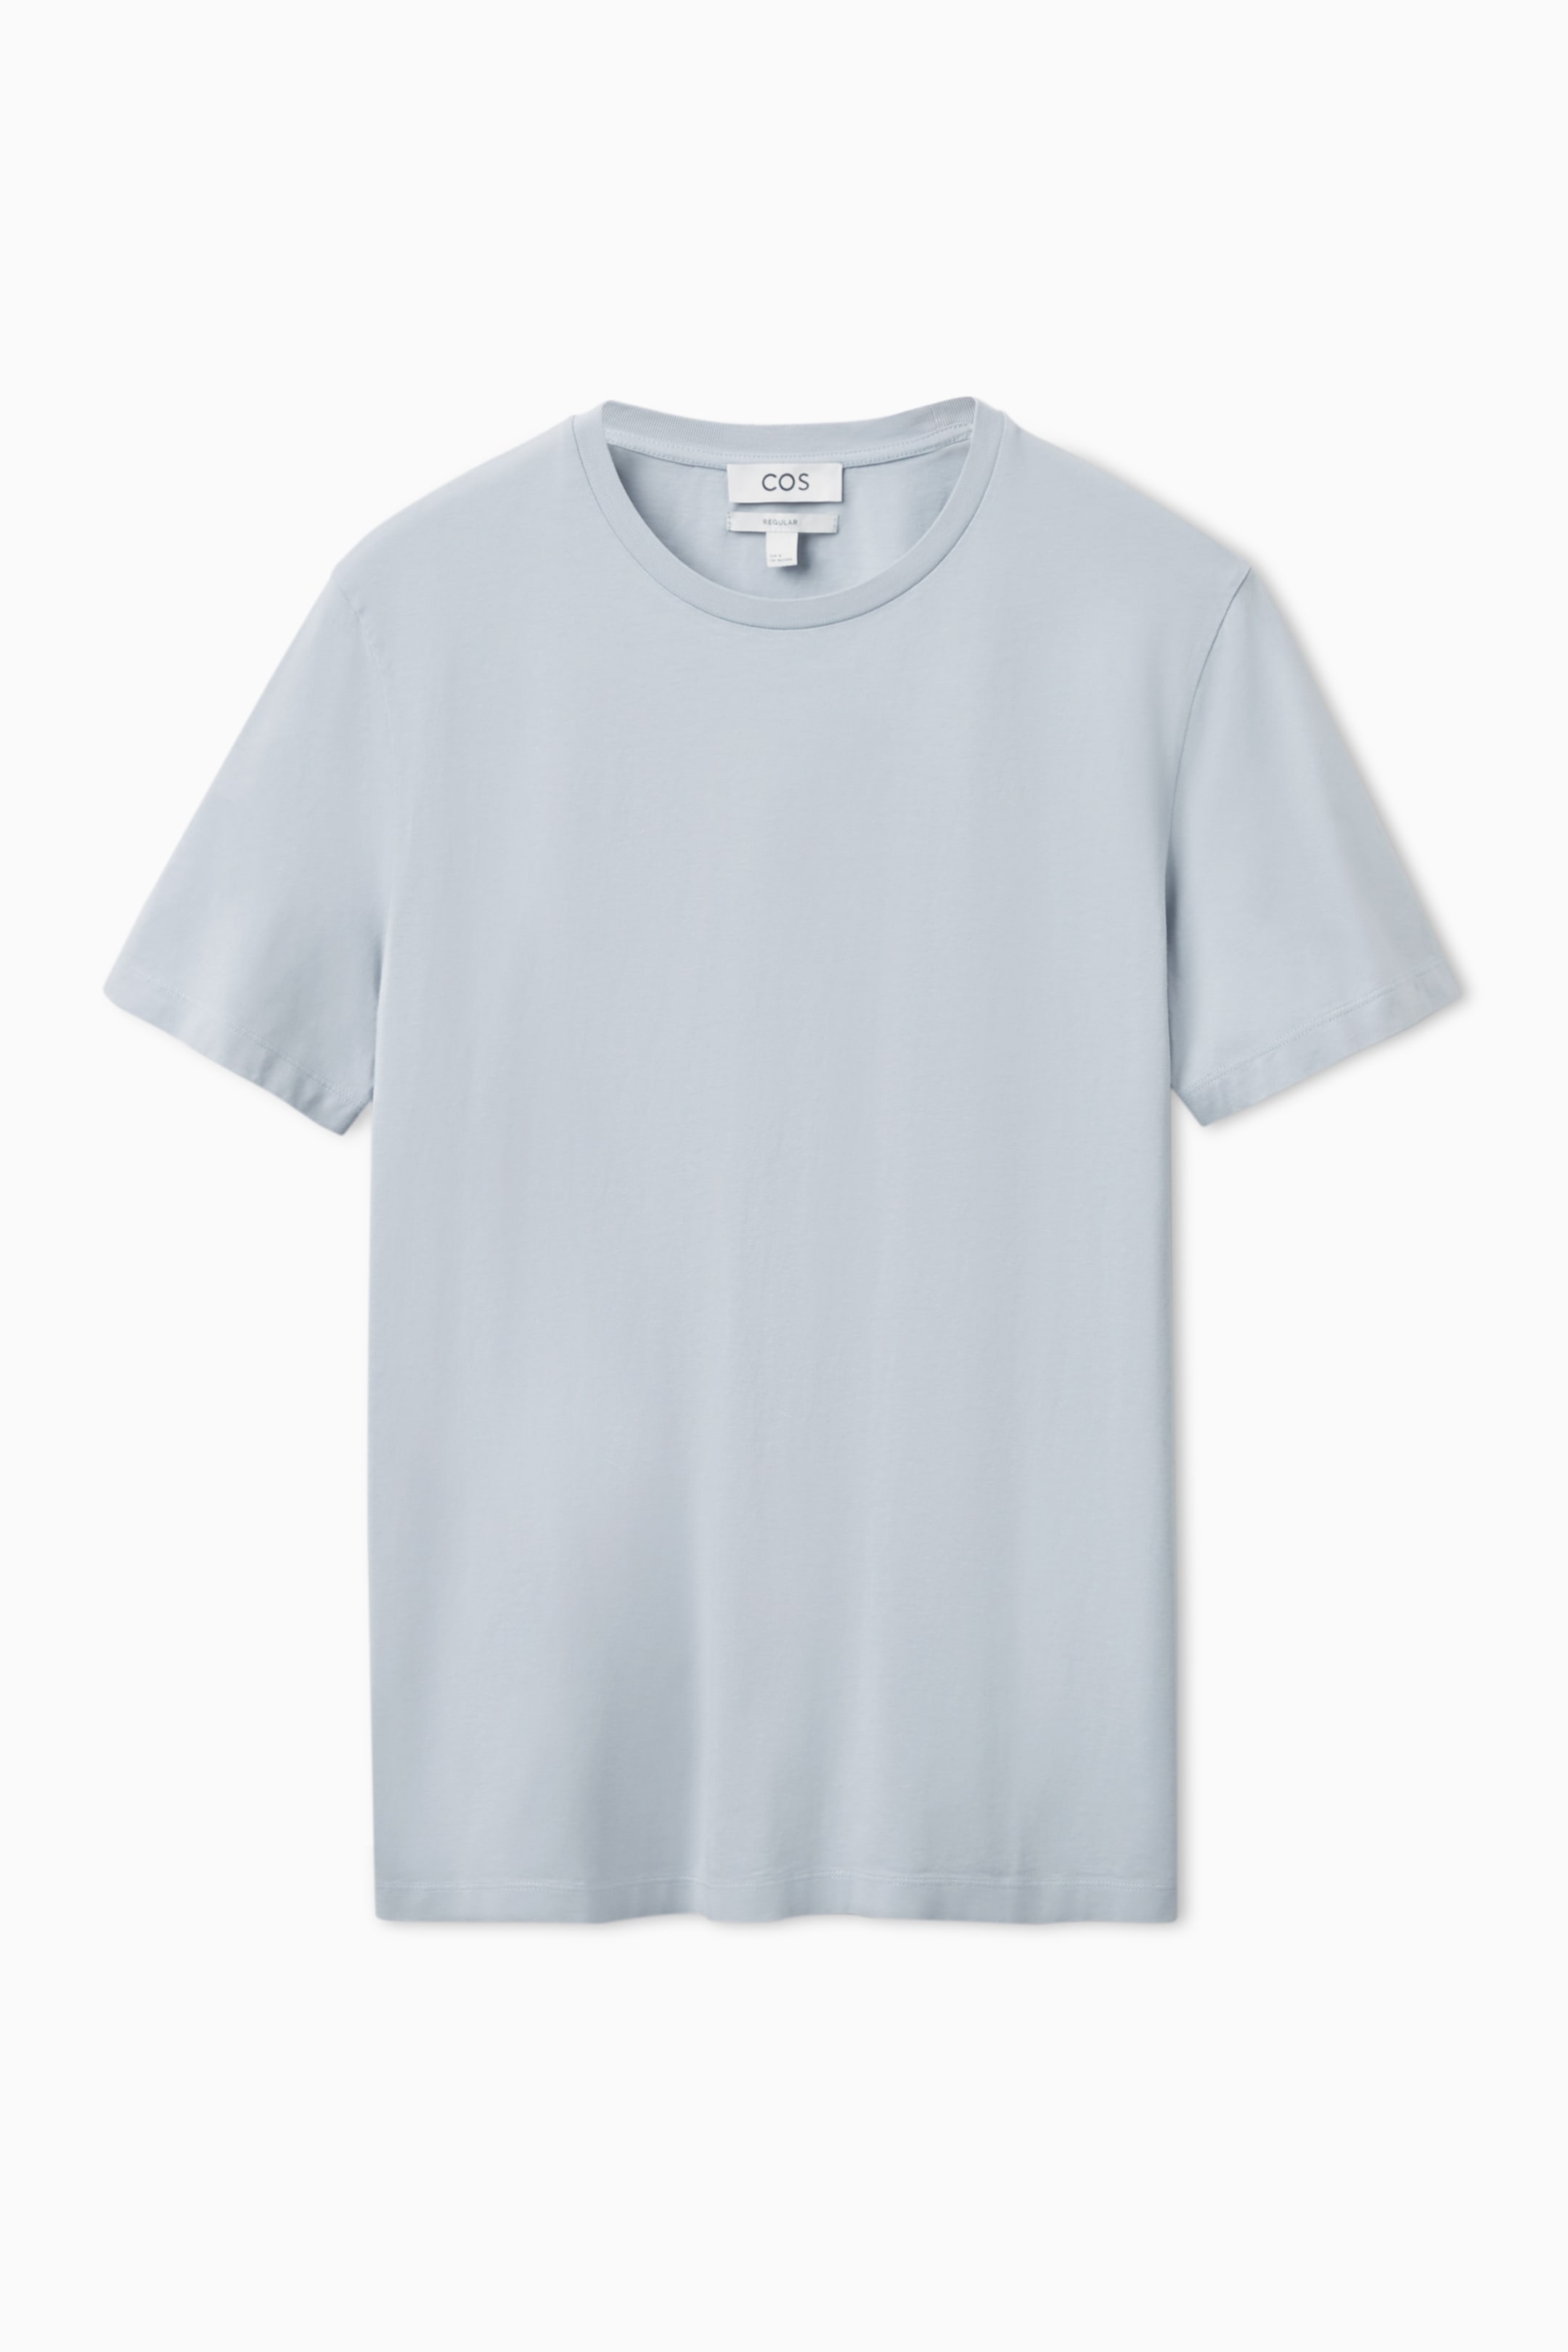 Front image of cos THE EXTRA FINE T-SHIRT in LIGHT BLUE